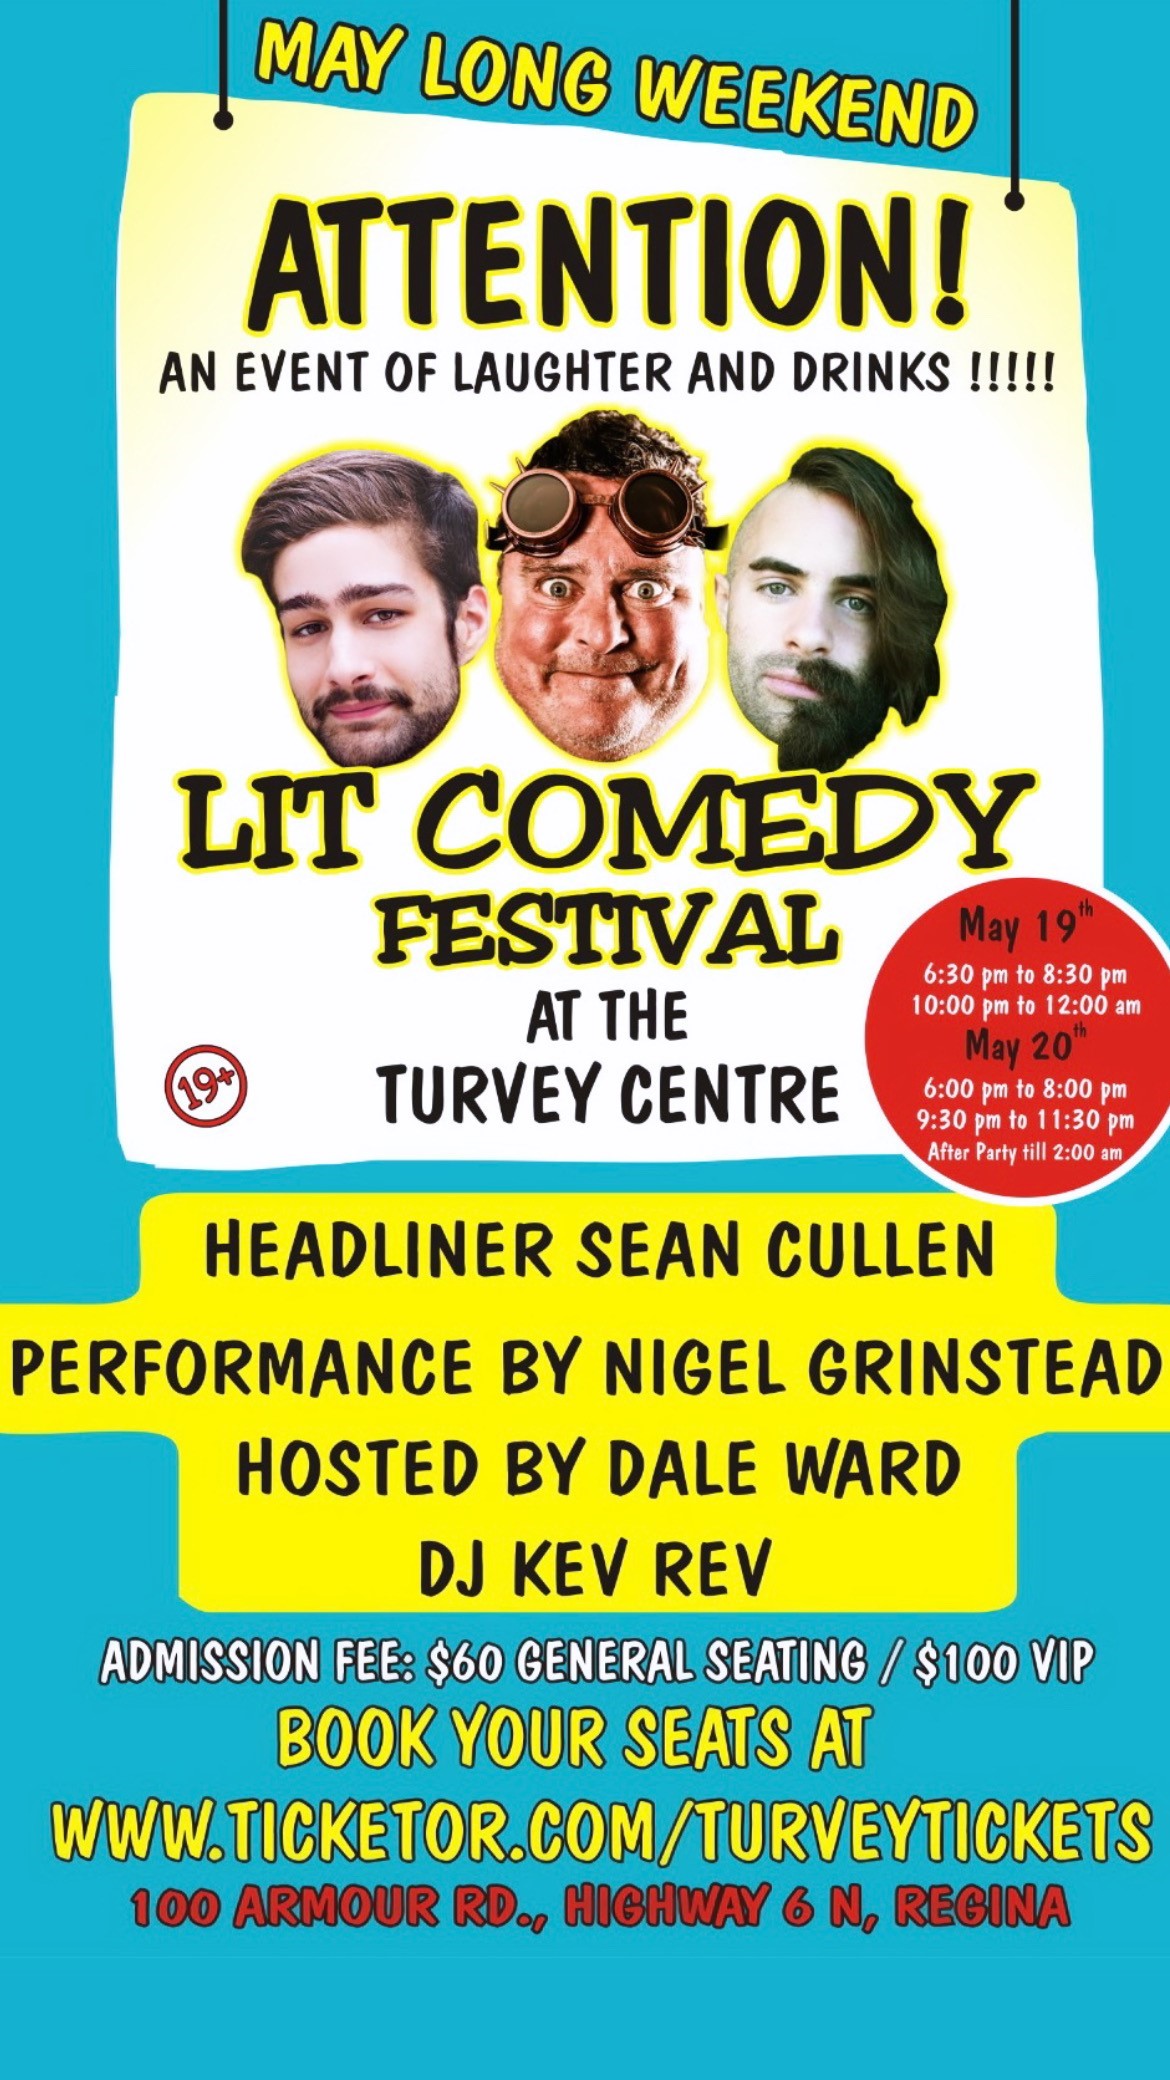 LIT COMEDY FESTIVAL Headliner SEAN CULLEN, Performance by NIGEL GRINSTEAD Hosted by DALE WARD w/ DJ REV KEV on May 20, 21:30@Turvey Center Regina - Buy tickets and Get information on Turvey Convention Center 